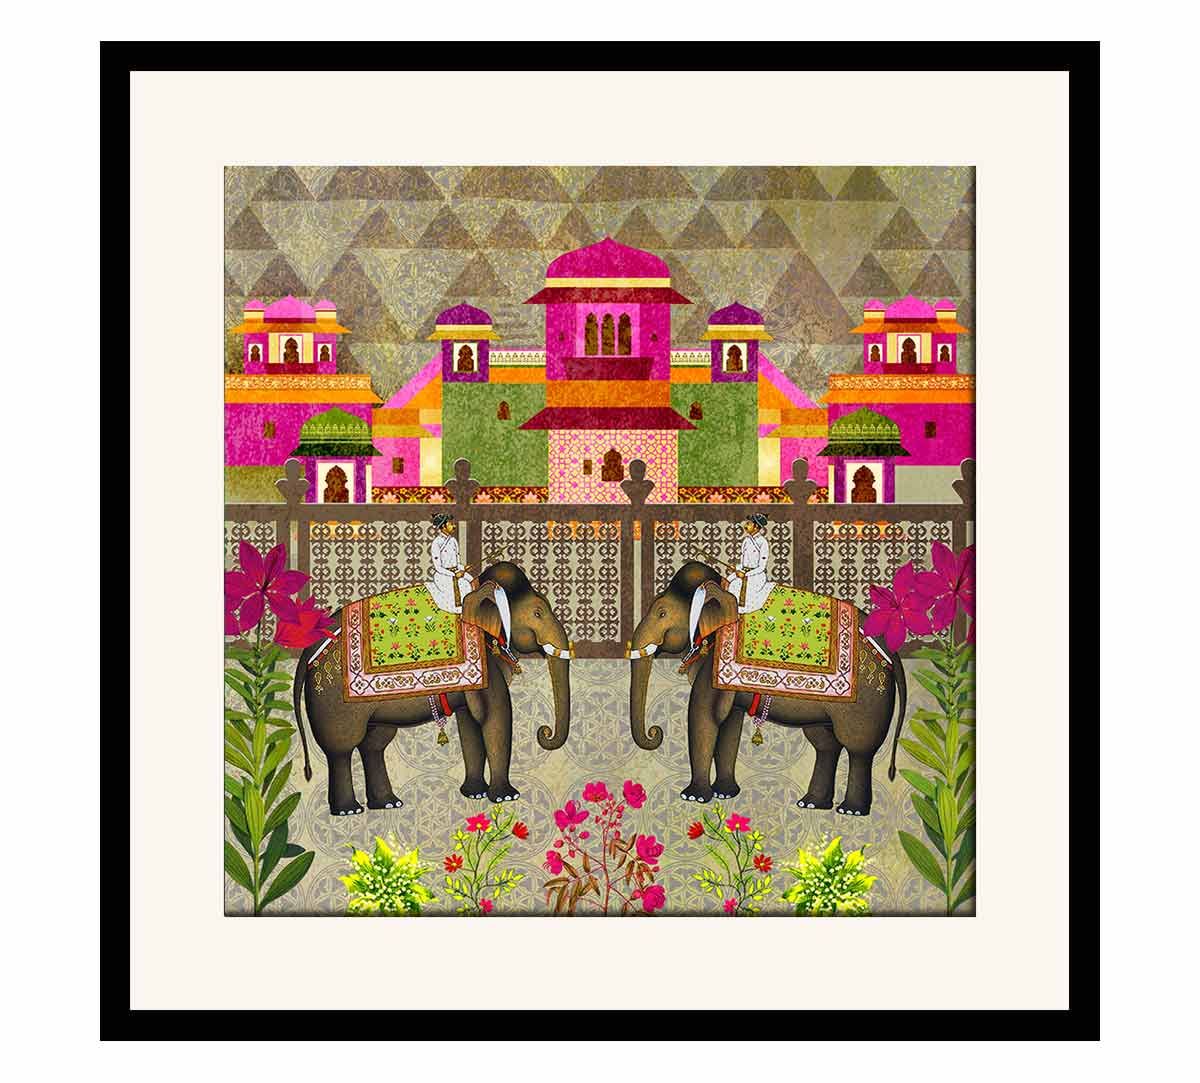 India Circus Field of Frolic Framed Wall Art